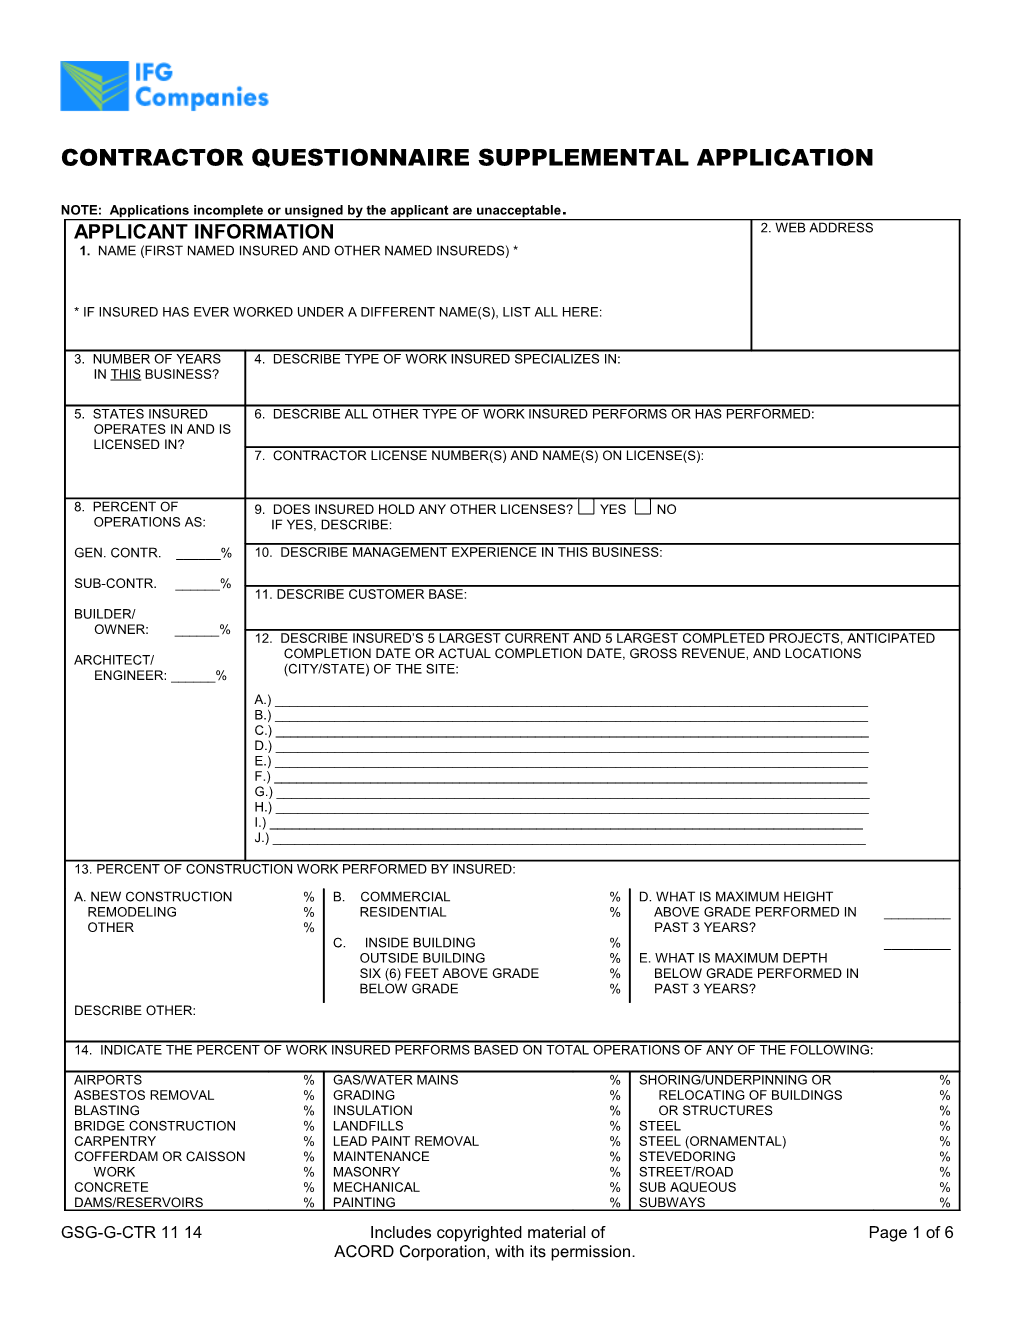 Products Liability Application